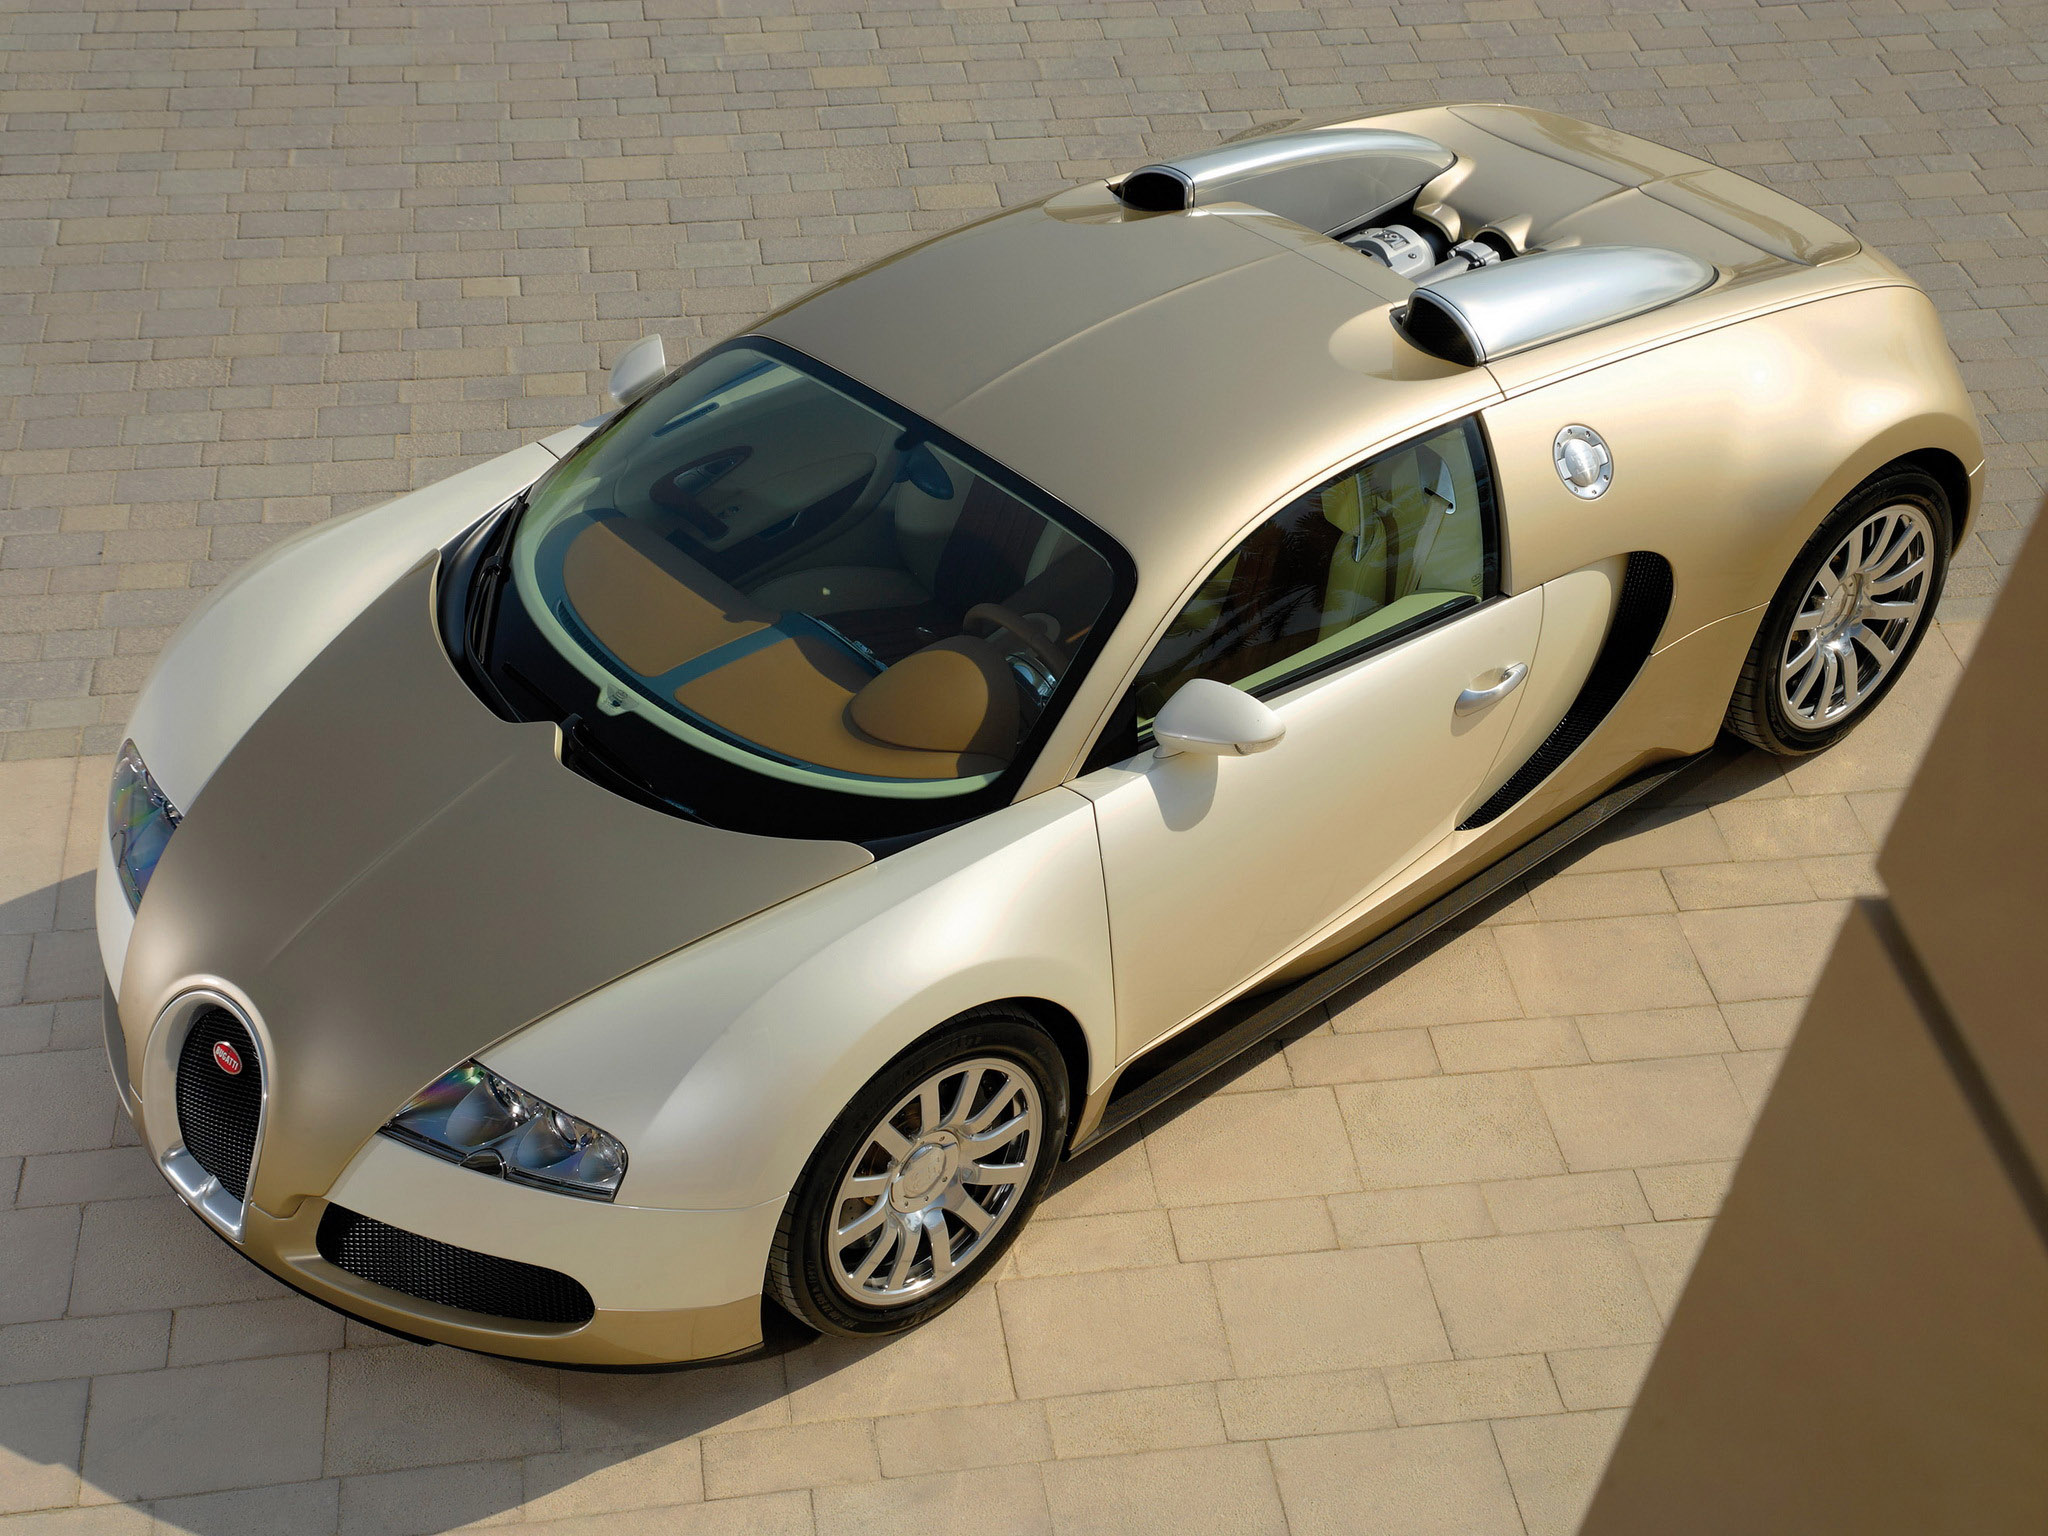 The Luxury And Power Of A White Gold Bugatti Veyron Grand Sport